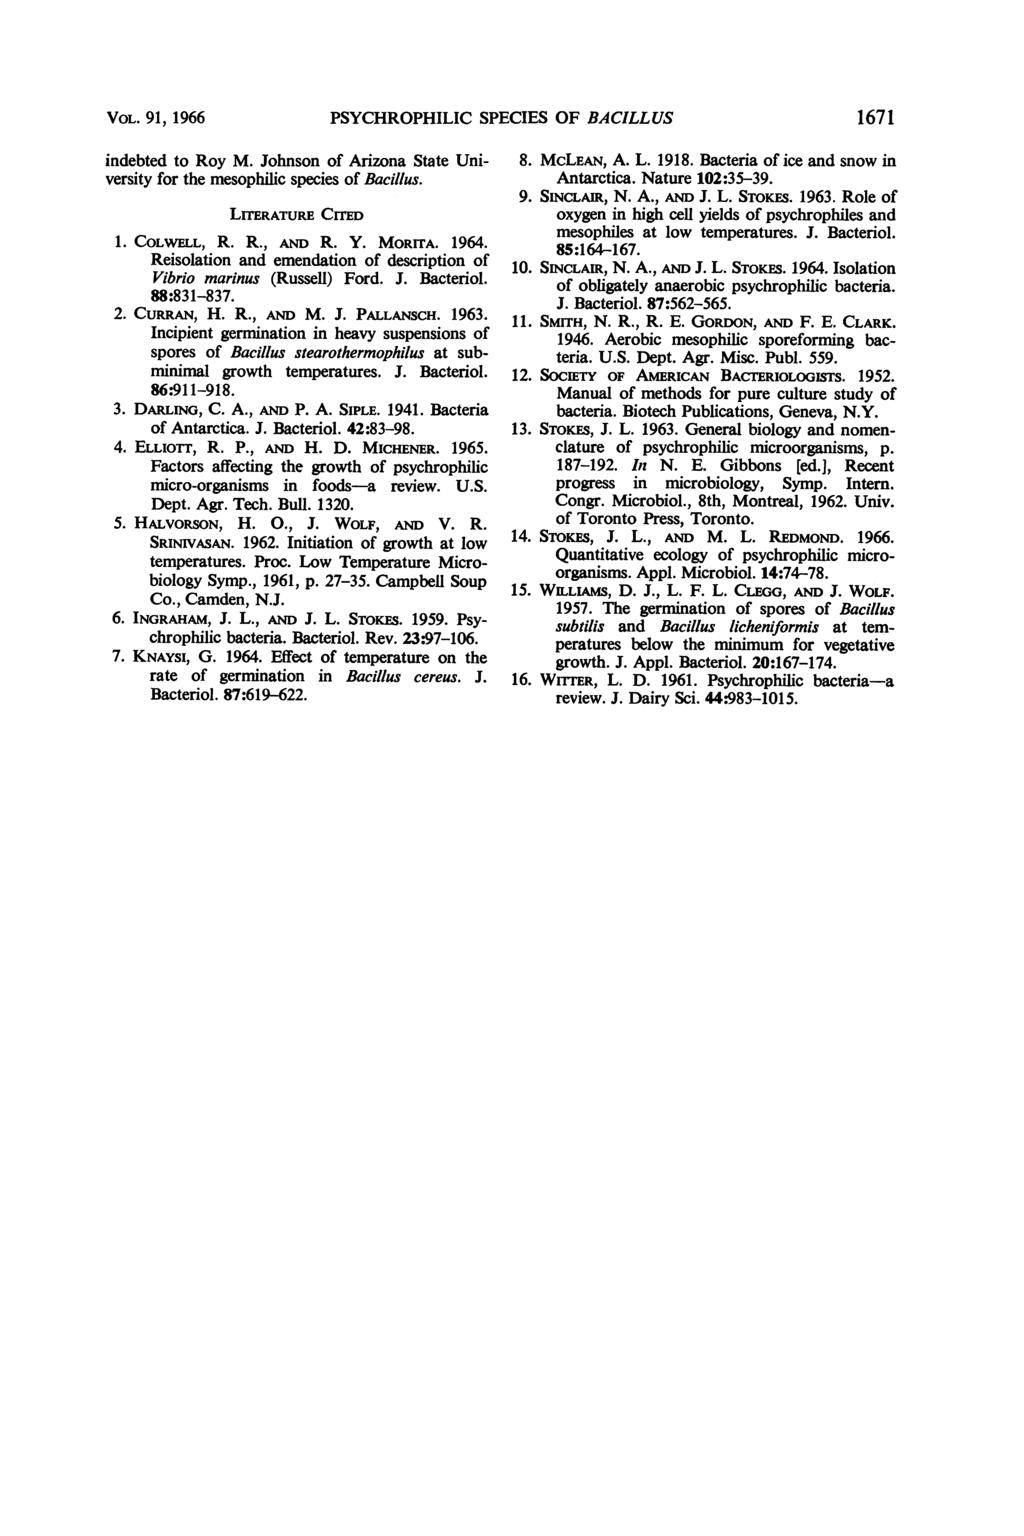 VOL. 91, 1966 PSYCHROPHILIC SPECIES OF BACILLUS 1671 indebted to Roy M. Johnson of Arizona State University for the mesophilic species of Bacillus. LITERATURE CrrE 1. COLWELL, R. R., AND R. Y. MORITA.